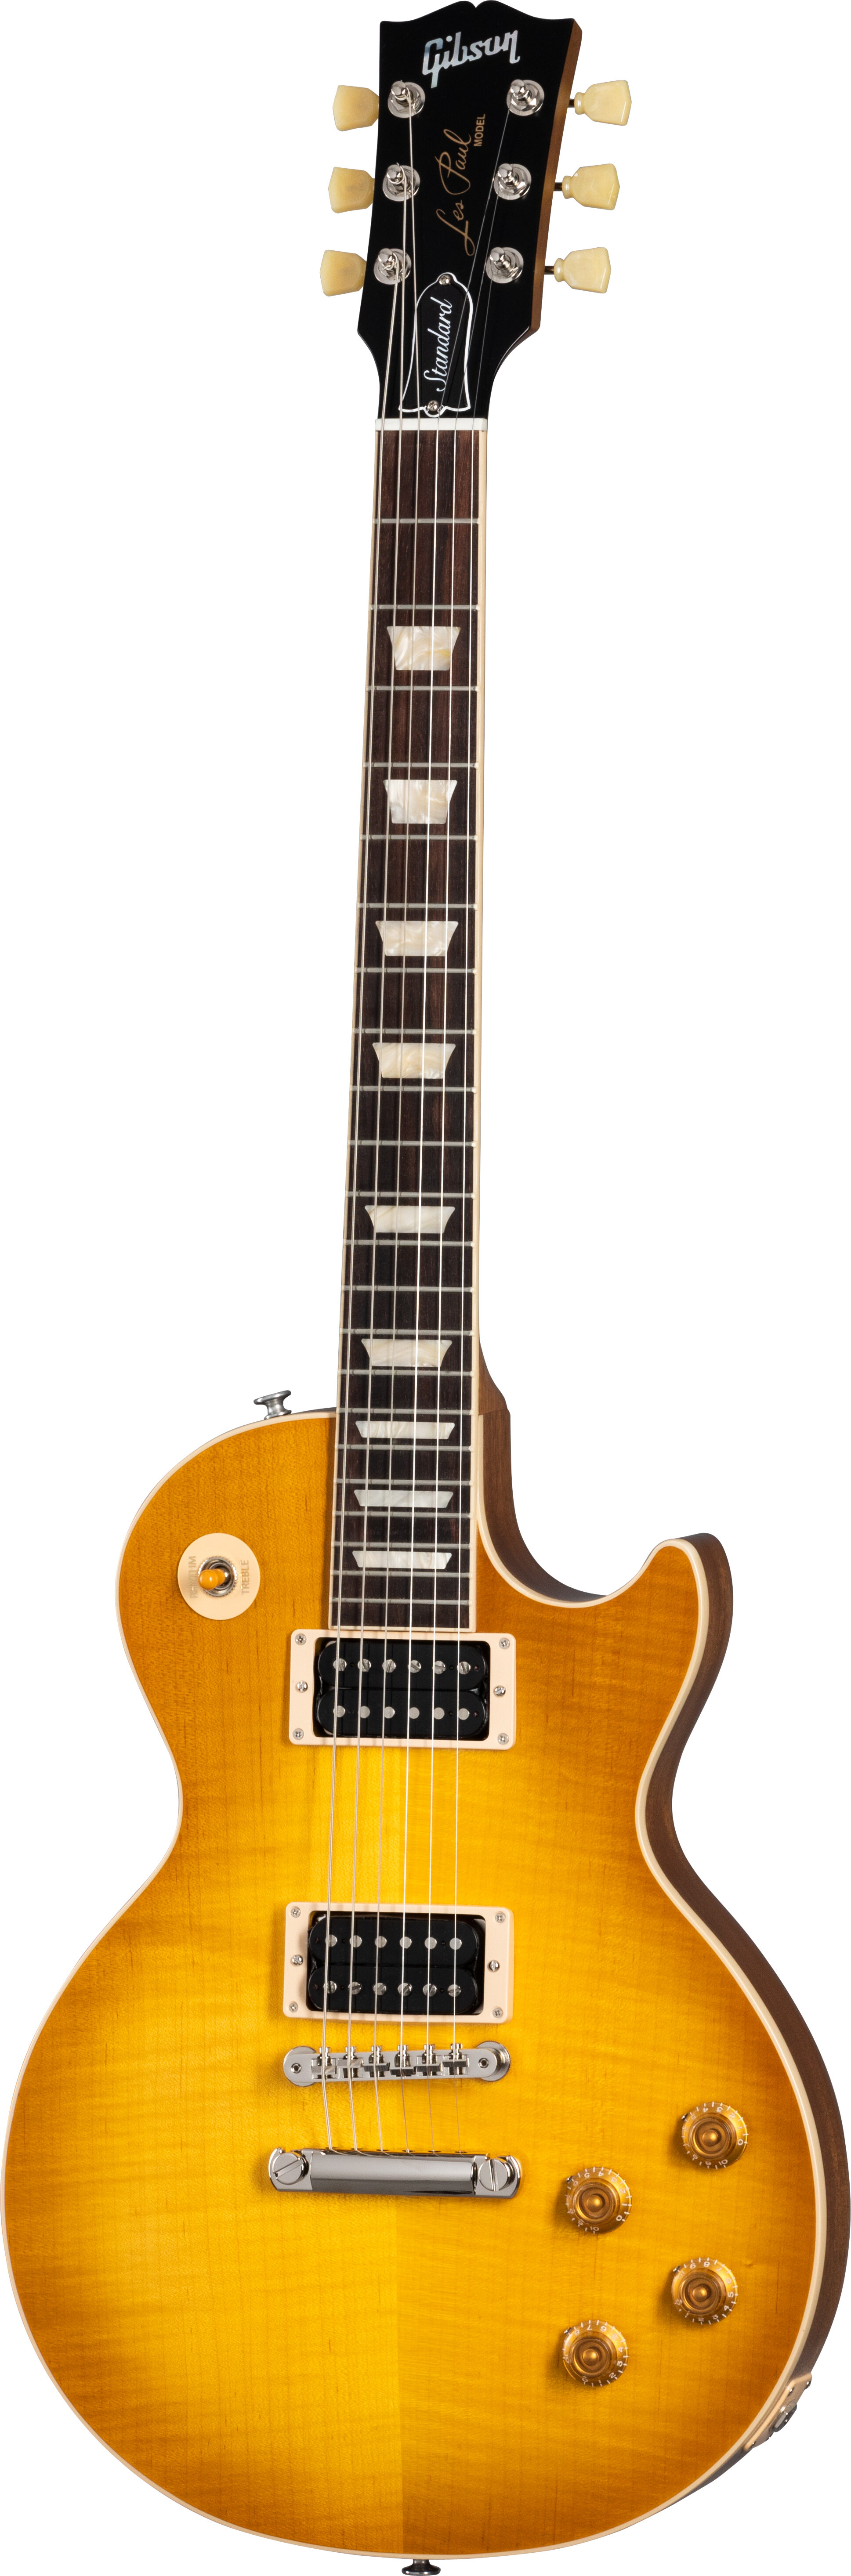 Gibson Les Paul Standard 50s Faded Honey Burst WC -  LPS5F00FHNH1